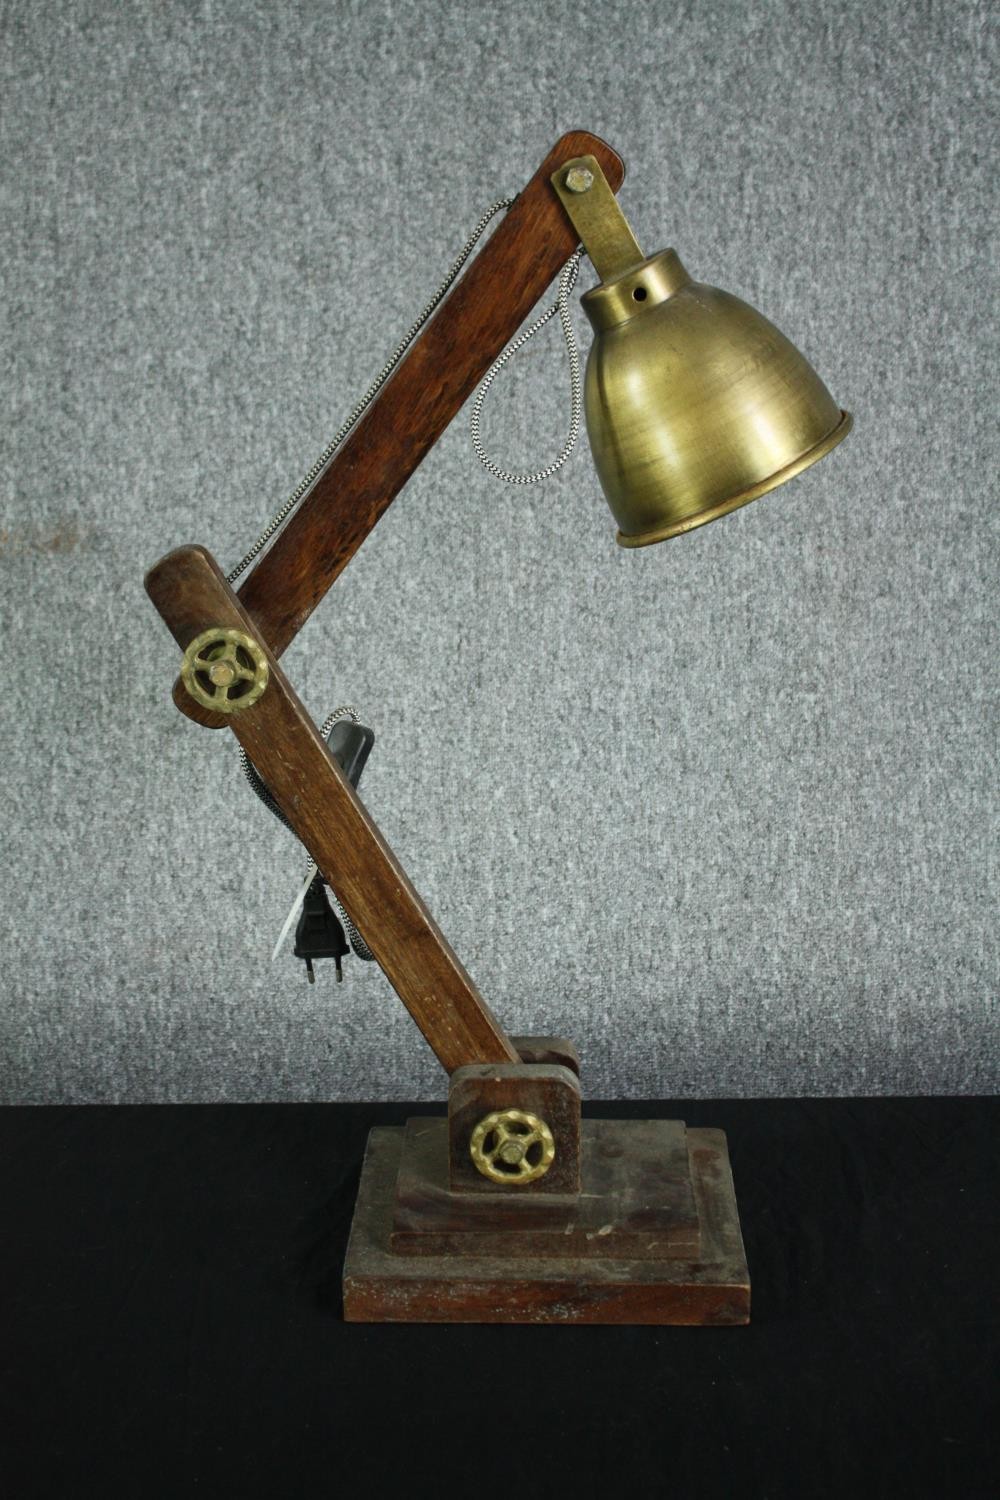 A wooden anglepoise type lamp with a metal shade and fixings. H.77cm.